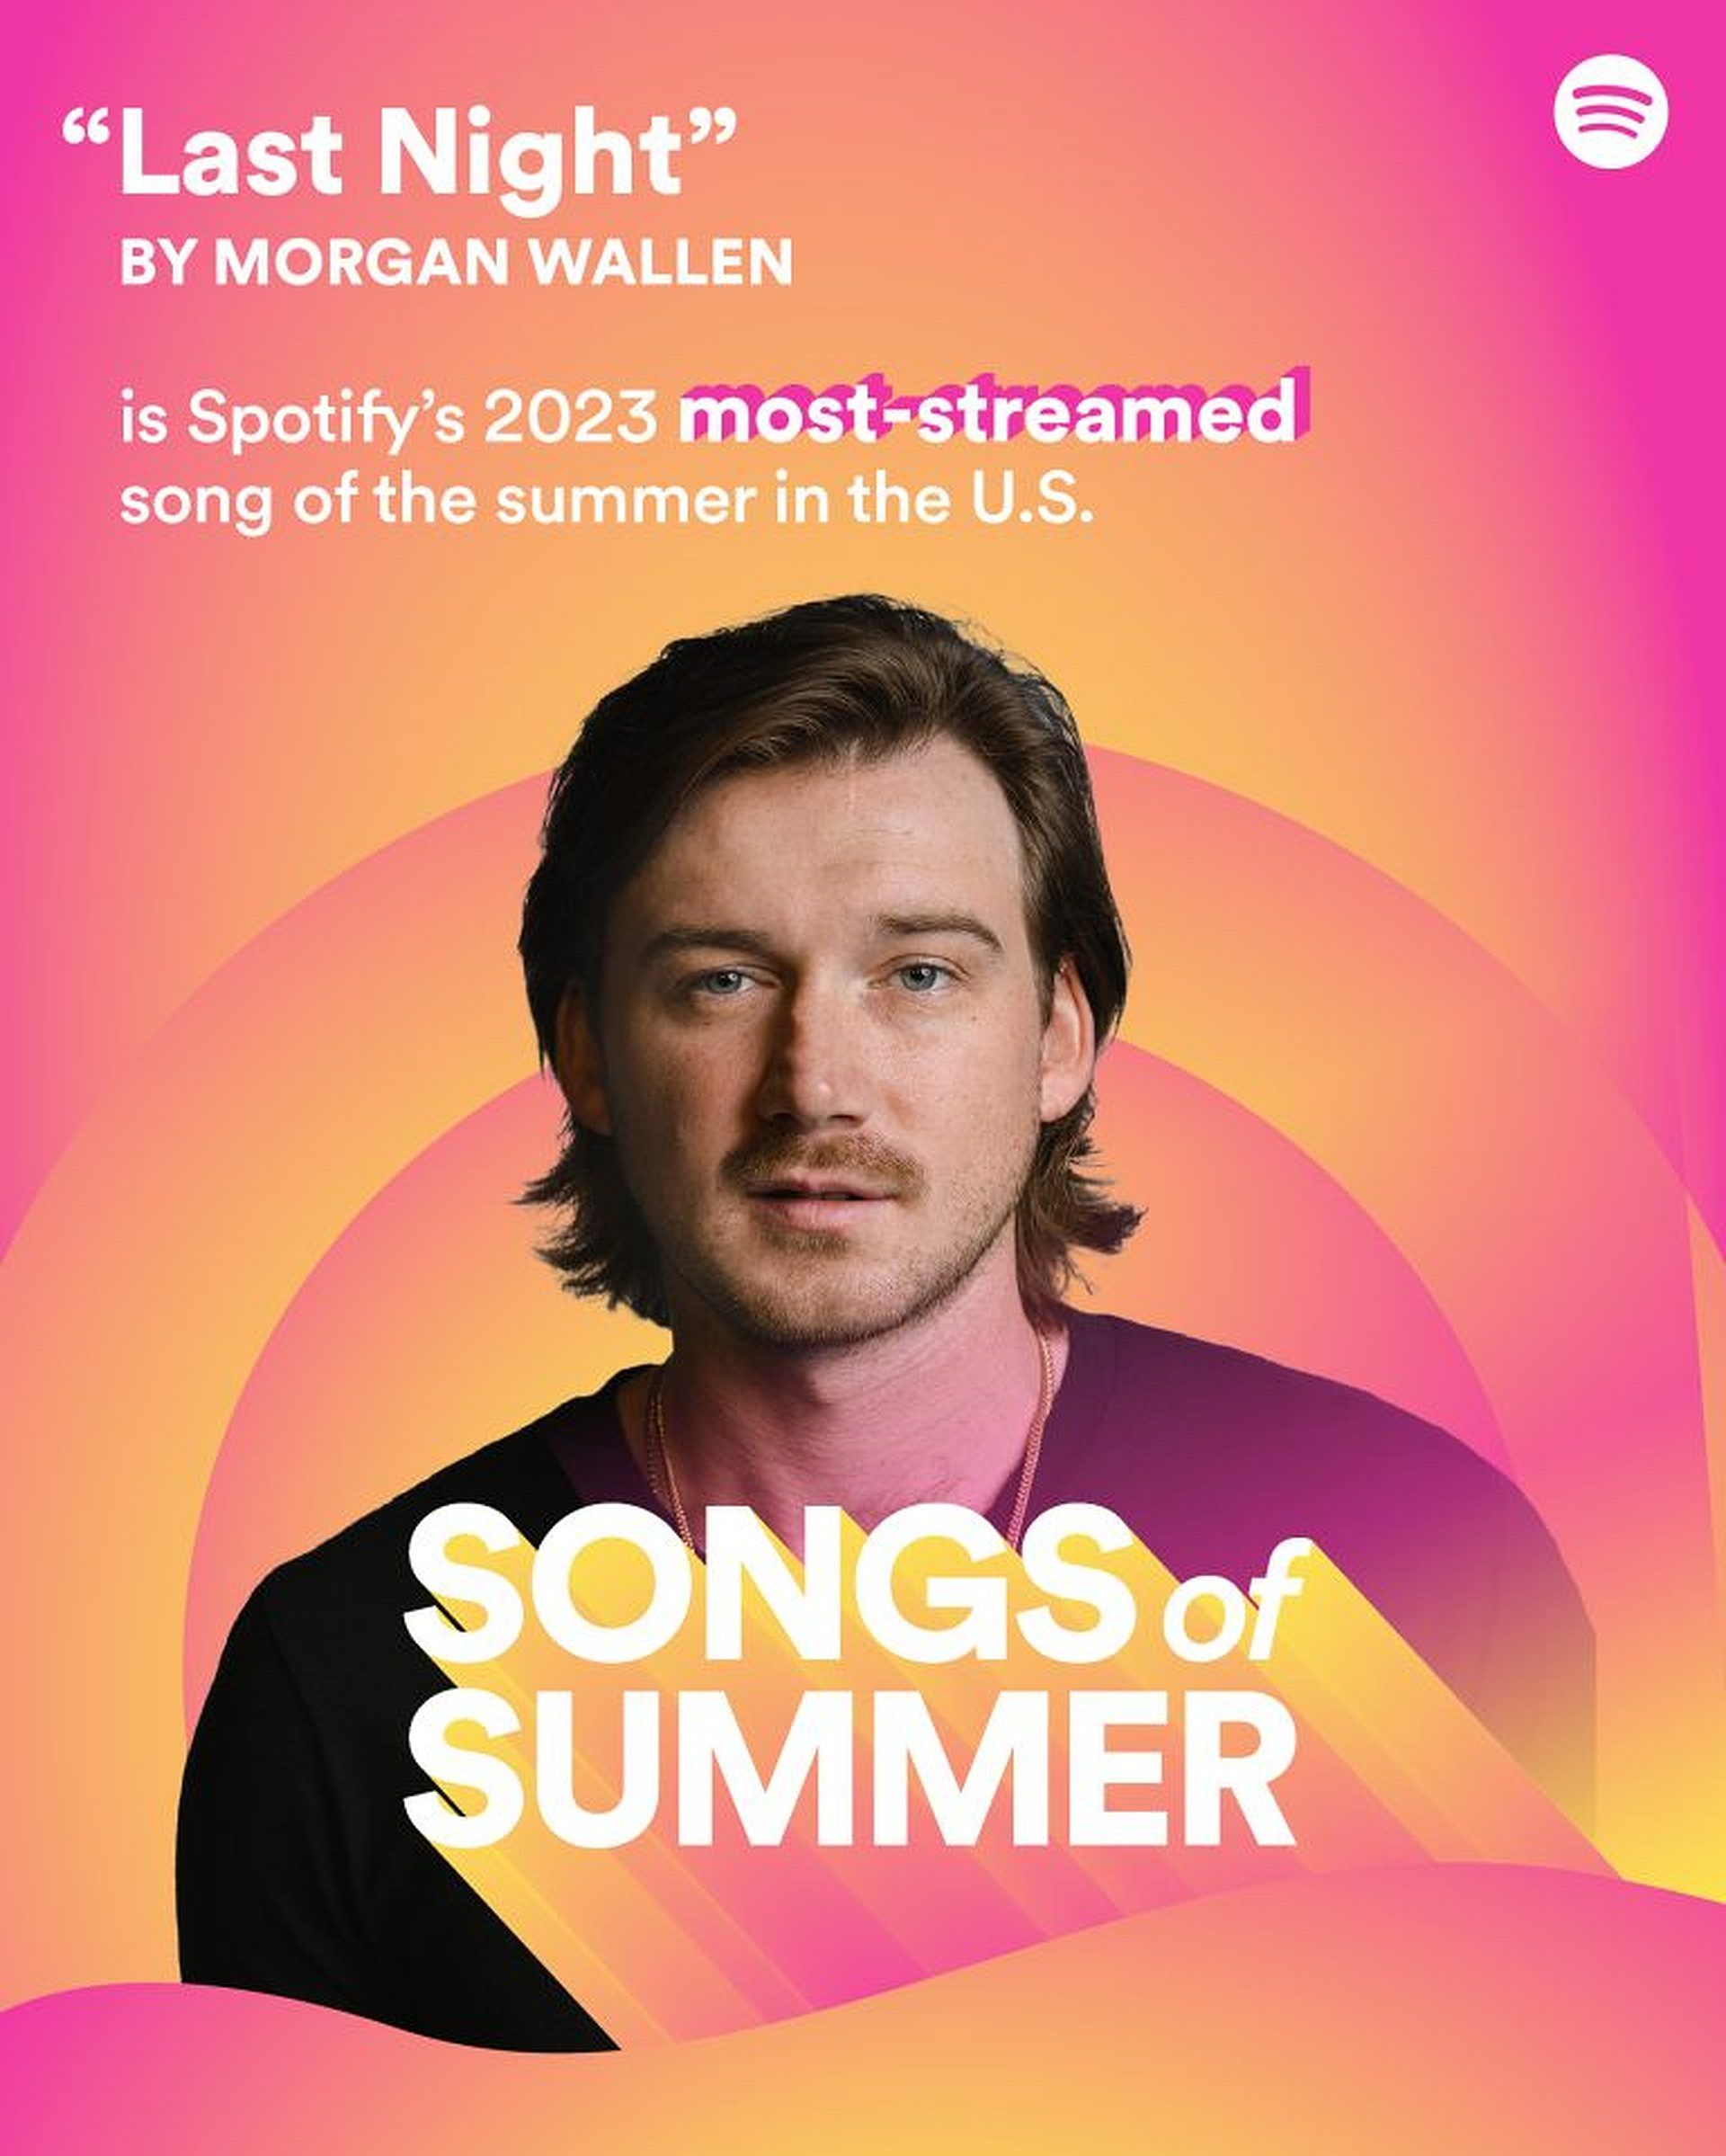 Spotify Songs of the Summer: Most streamed tracks revealed